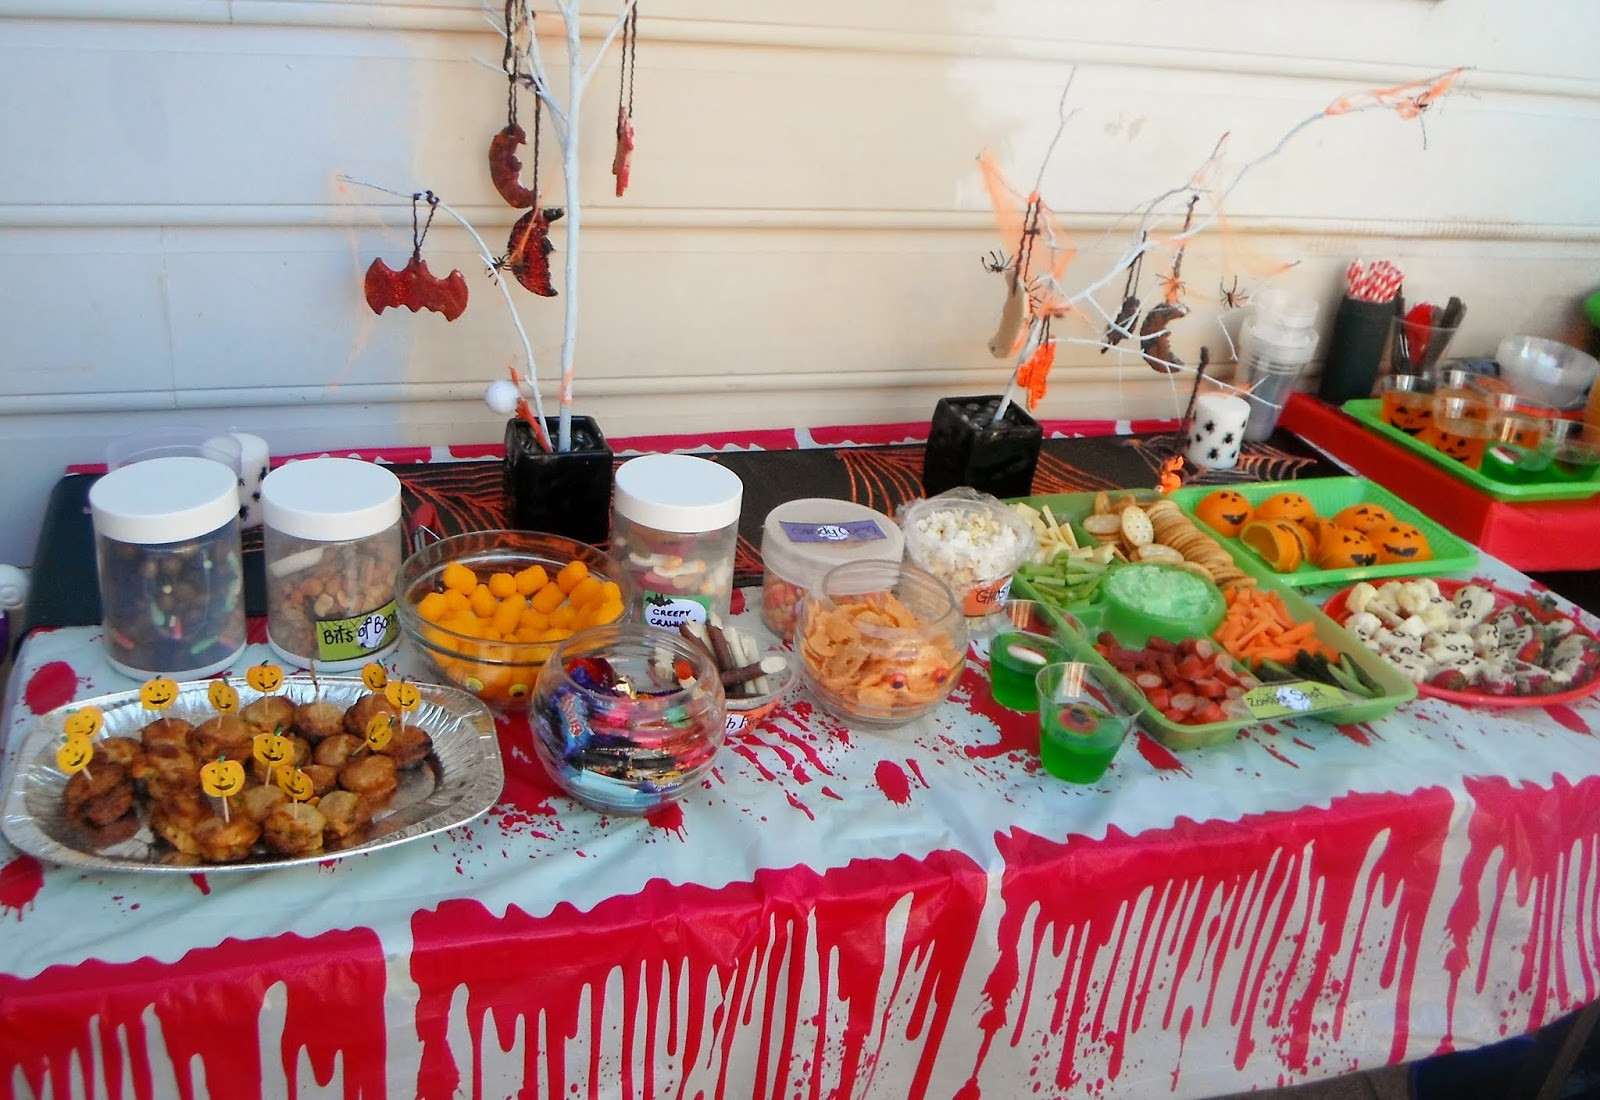 Halloween Office Food Party Ideas
 Adventures at home with Mum Halloween Party Food